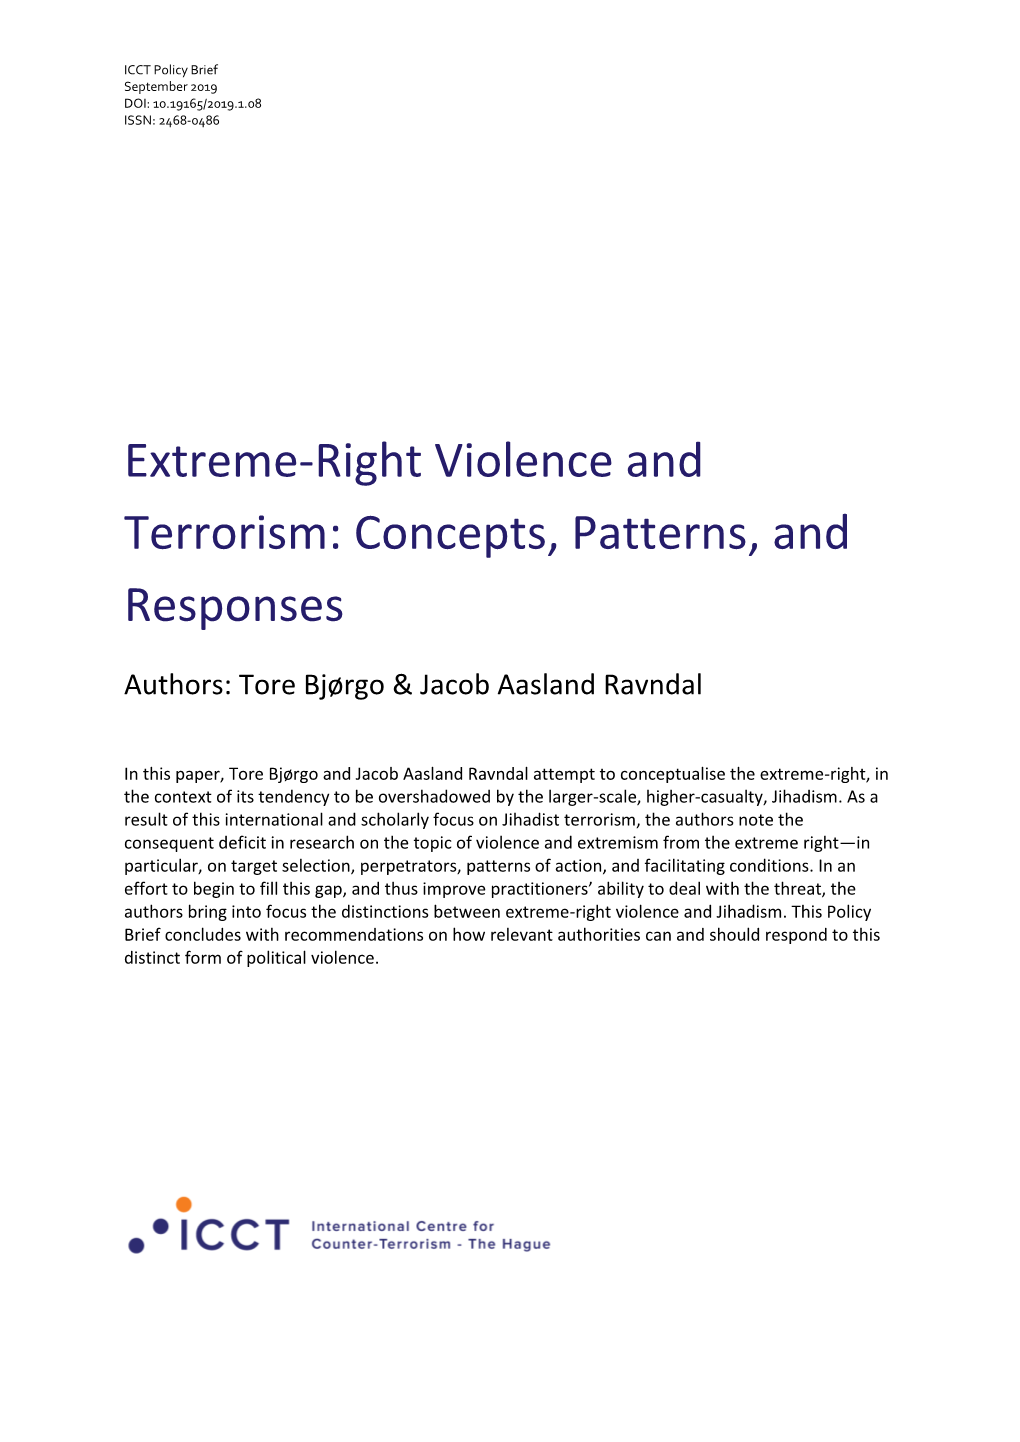 Extreme-Right Violence and Terrorism: Concepts, Patterns, and Responses